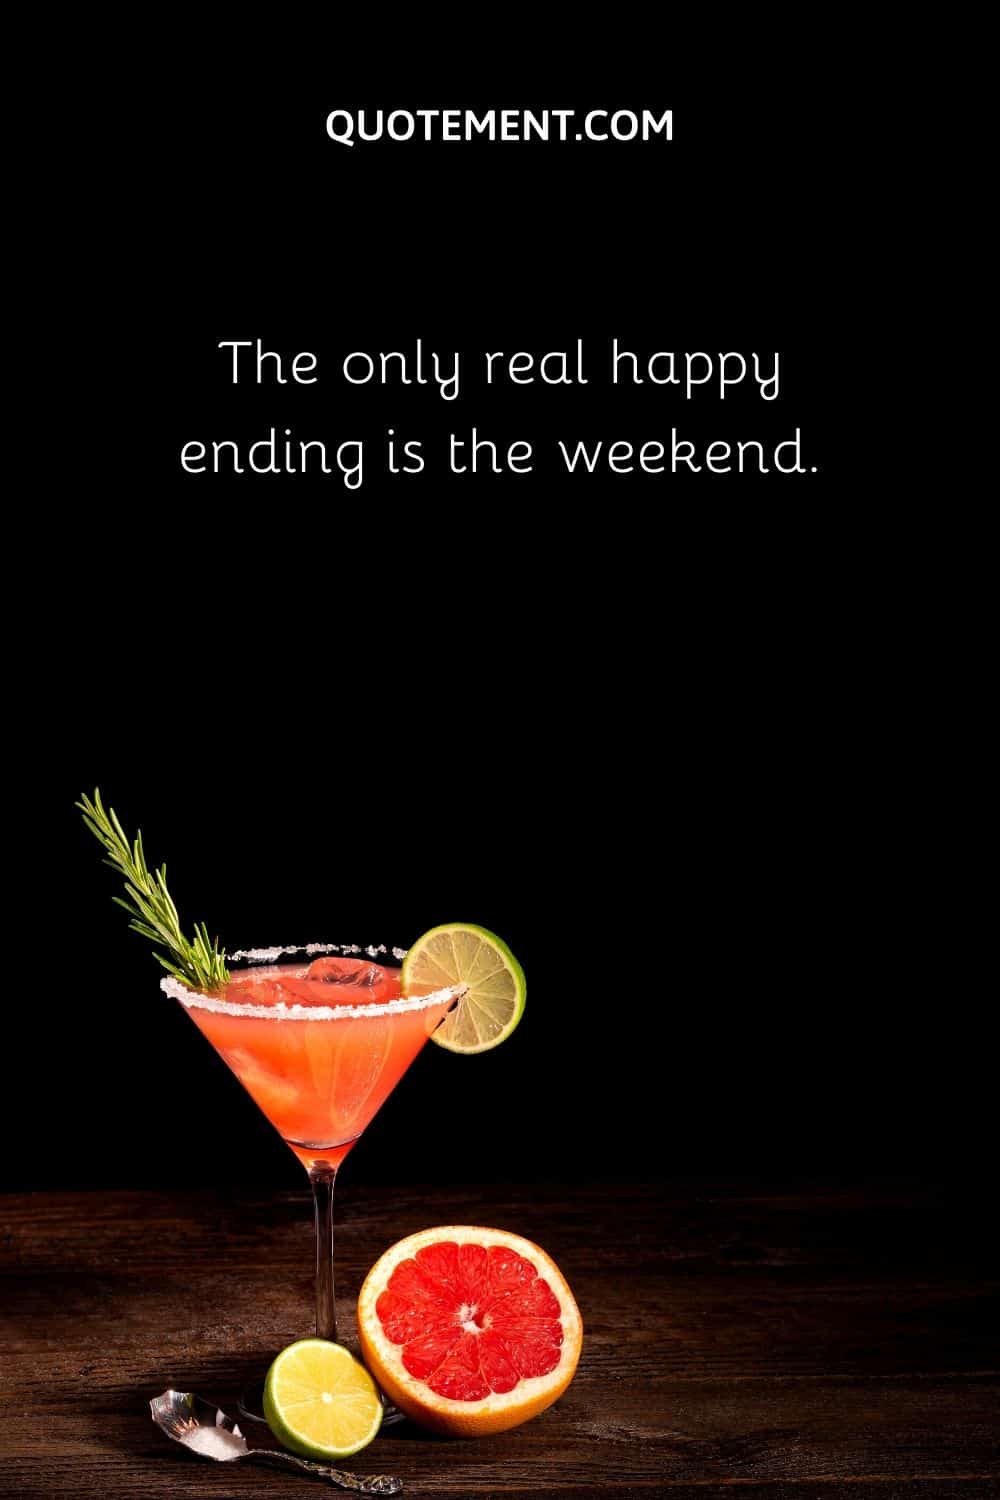 The only real happy ending is the weekend.